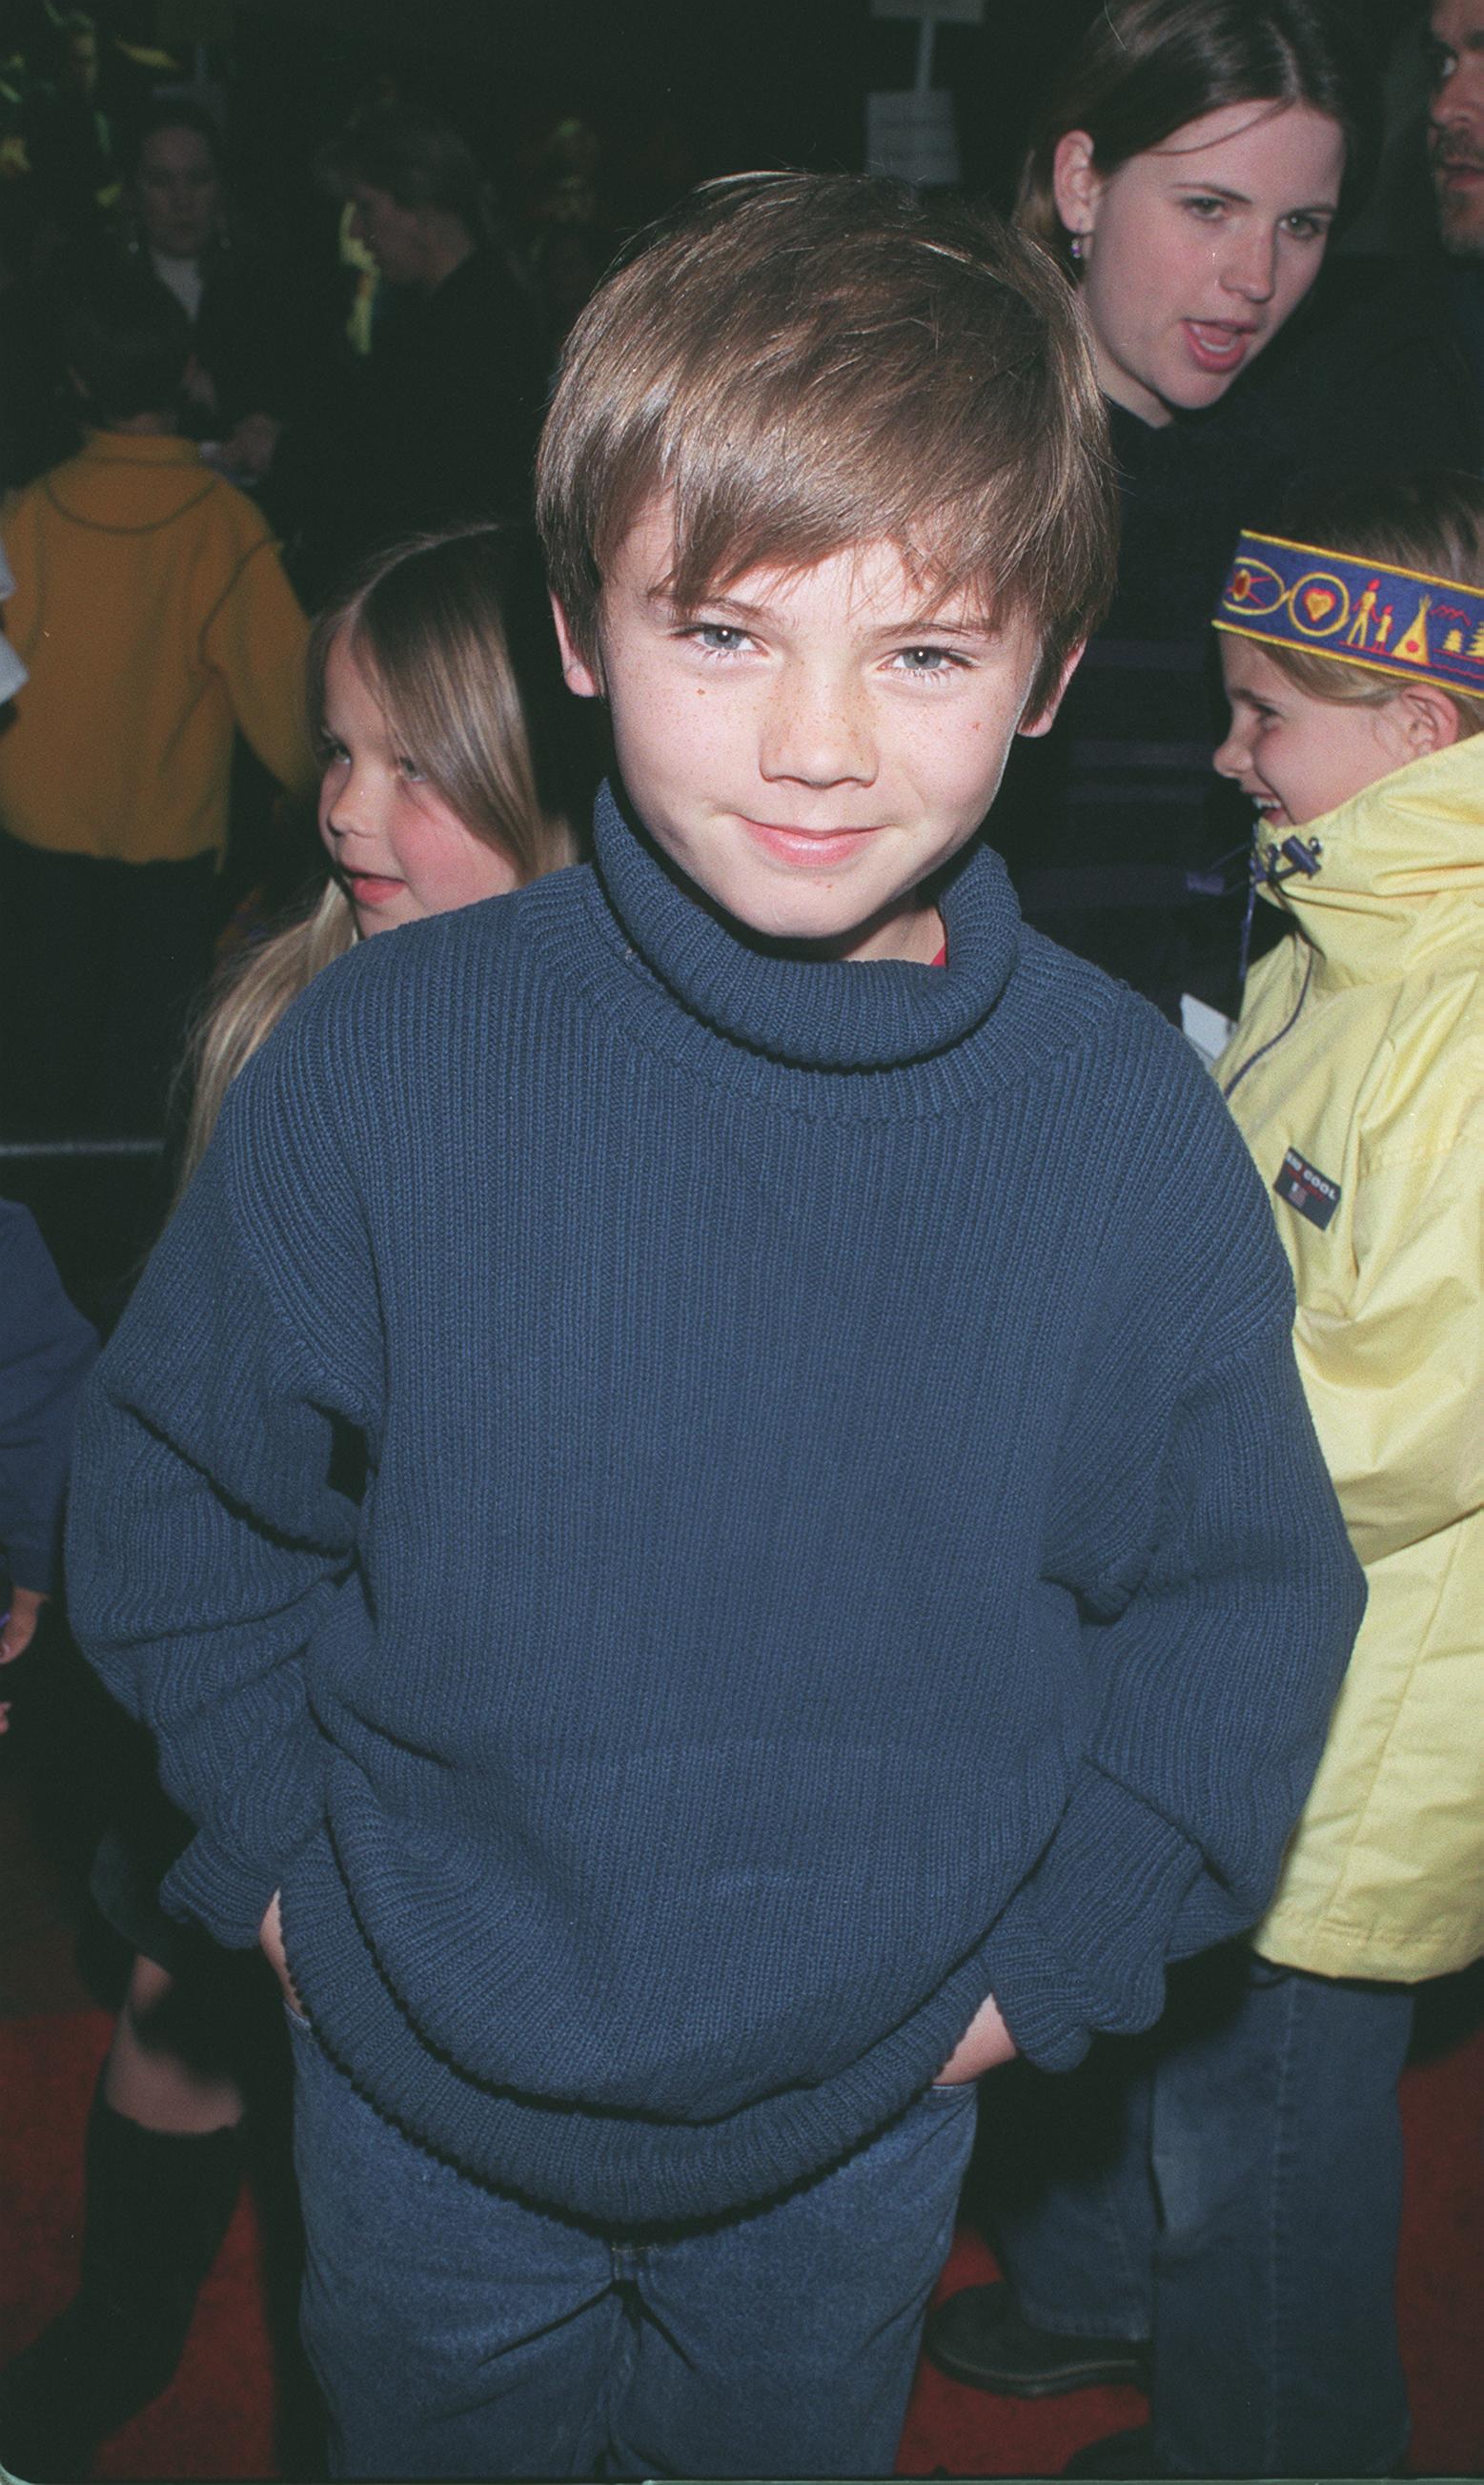 Jake Lloyd at the premiere of Rugrats in "Live Adventure" on March 26, 1999 in Universal City, California | Source: Getty images